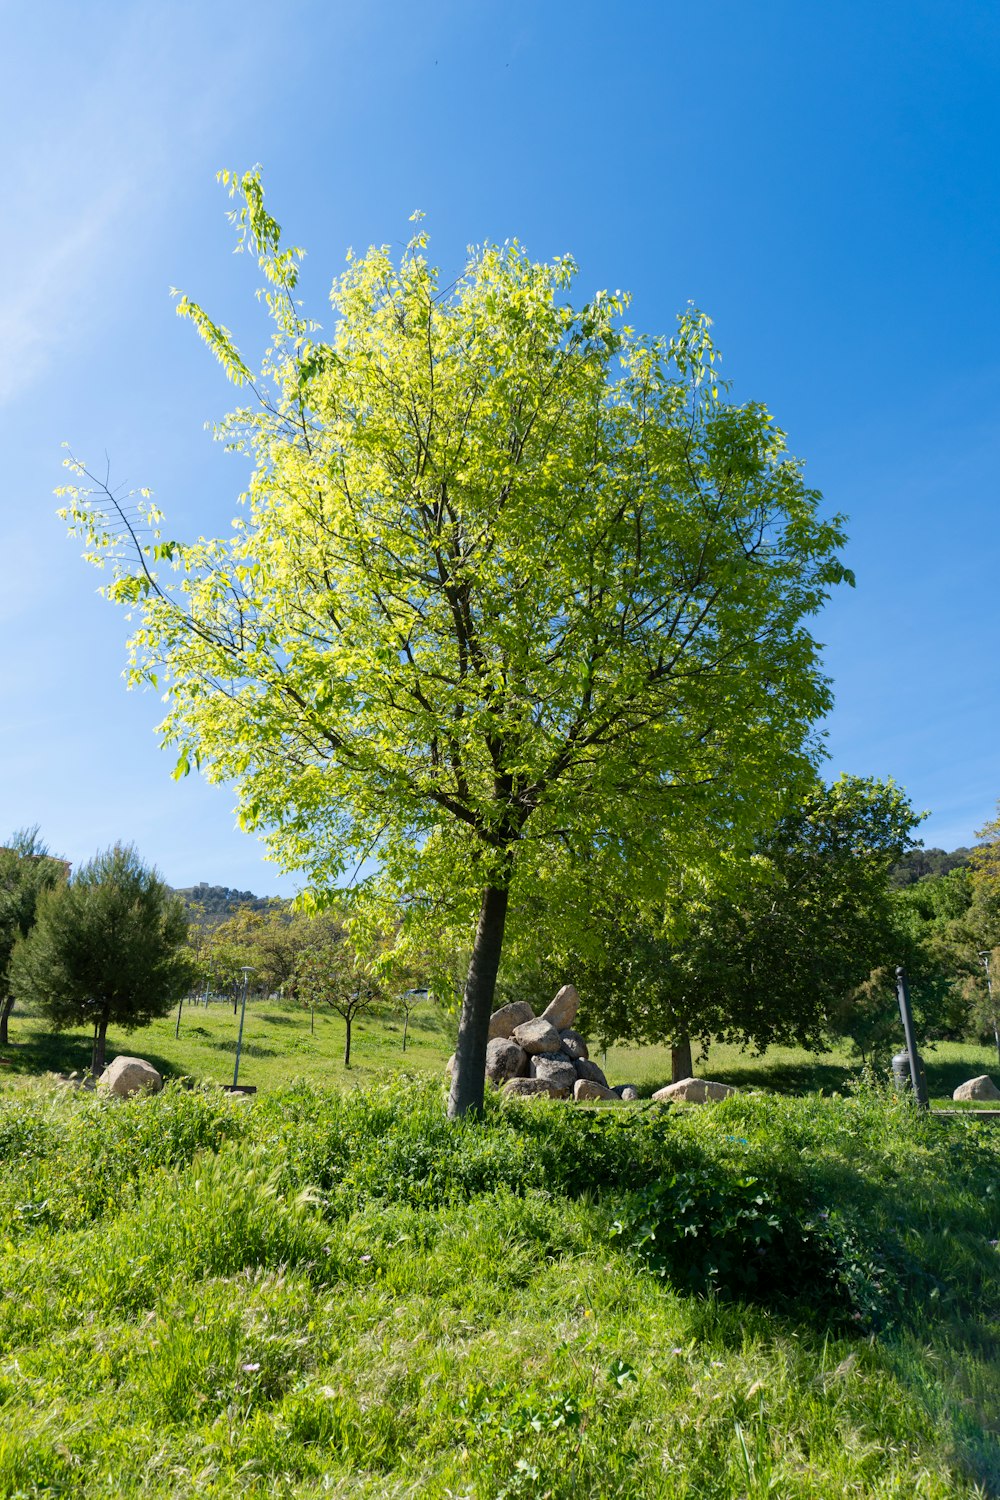 a tree in a grassy field with rocks in the background